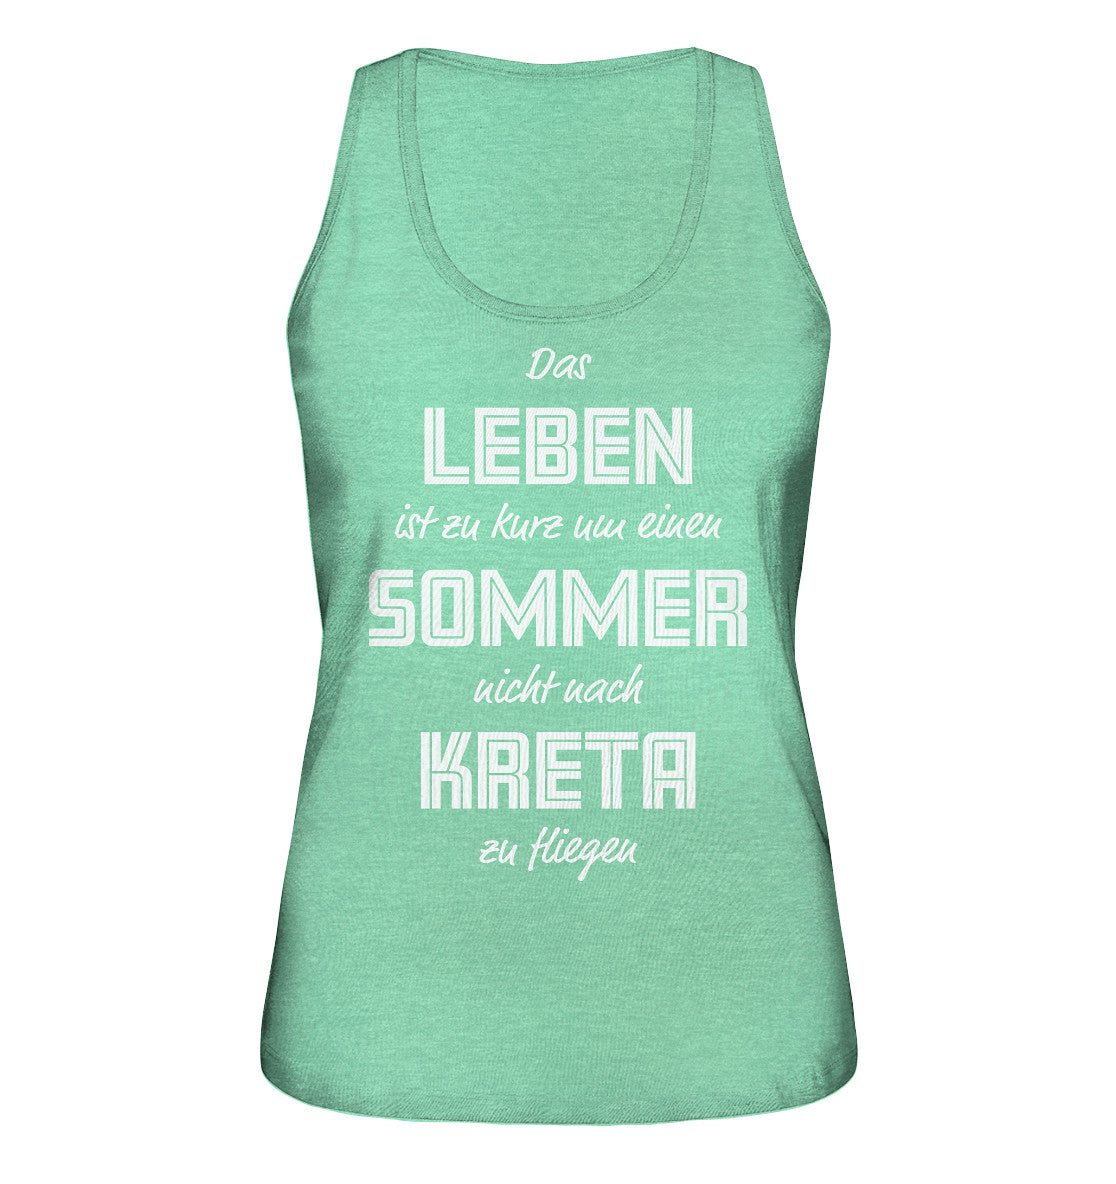 Life is too short not to fly to Crete for a summer - Ladies Organic Tank Top